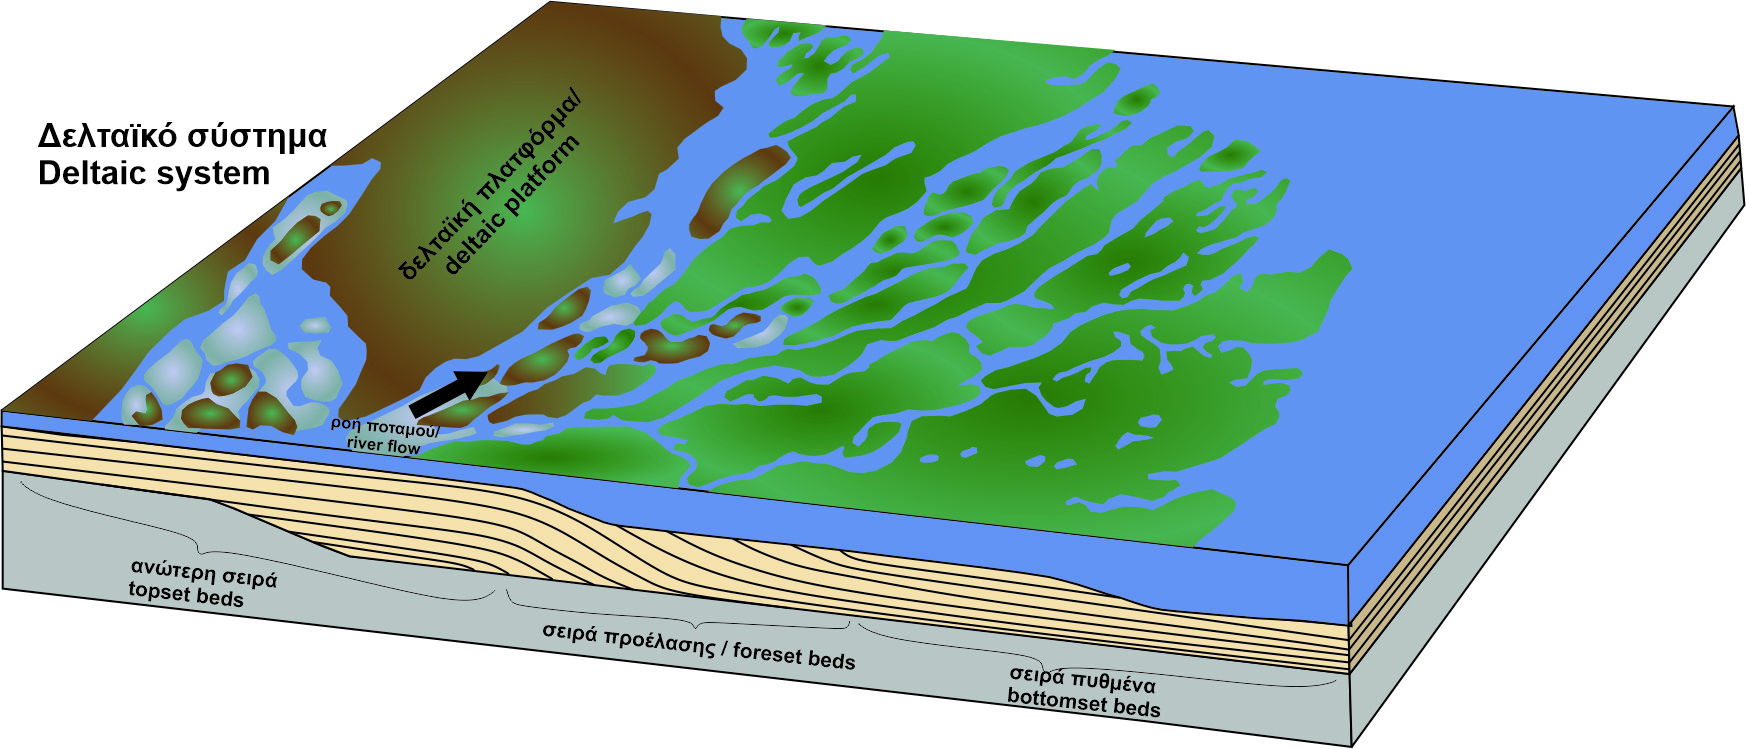 Simplified schematic 3D sketch of the Deltaic System